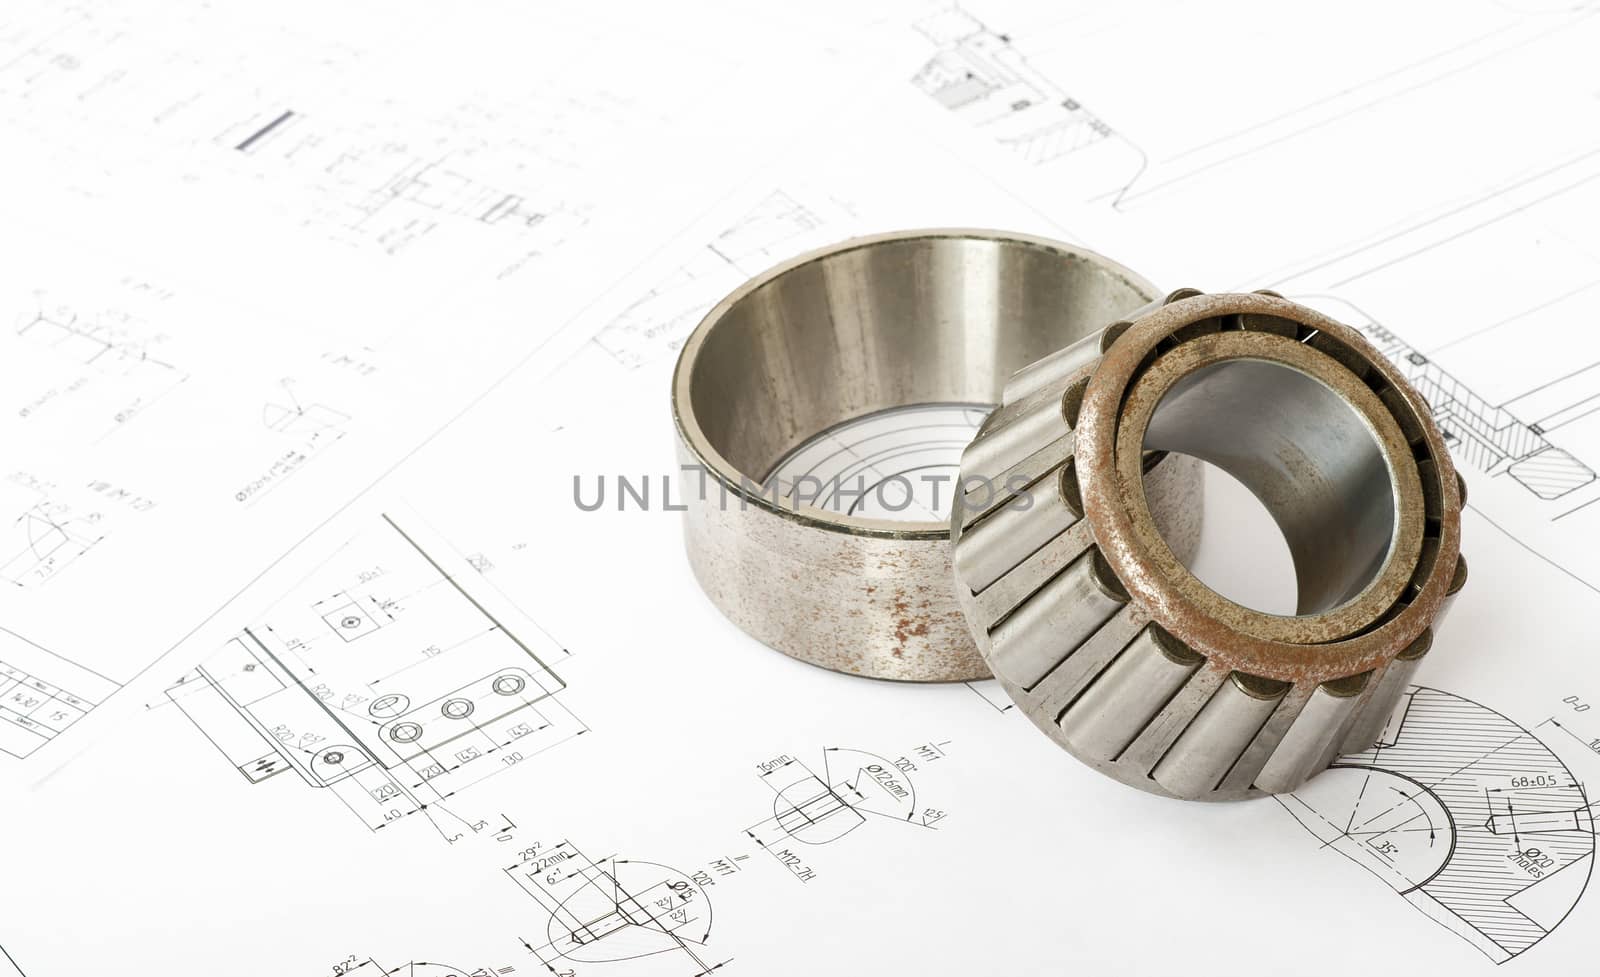 Roller bearing on blue prints, close up view